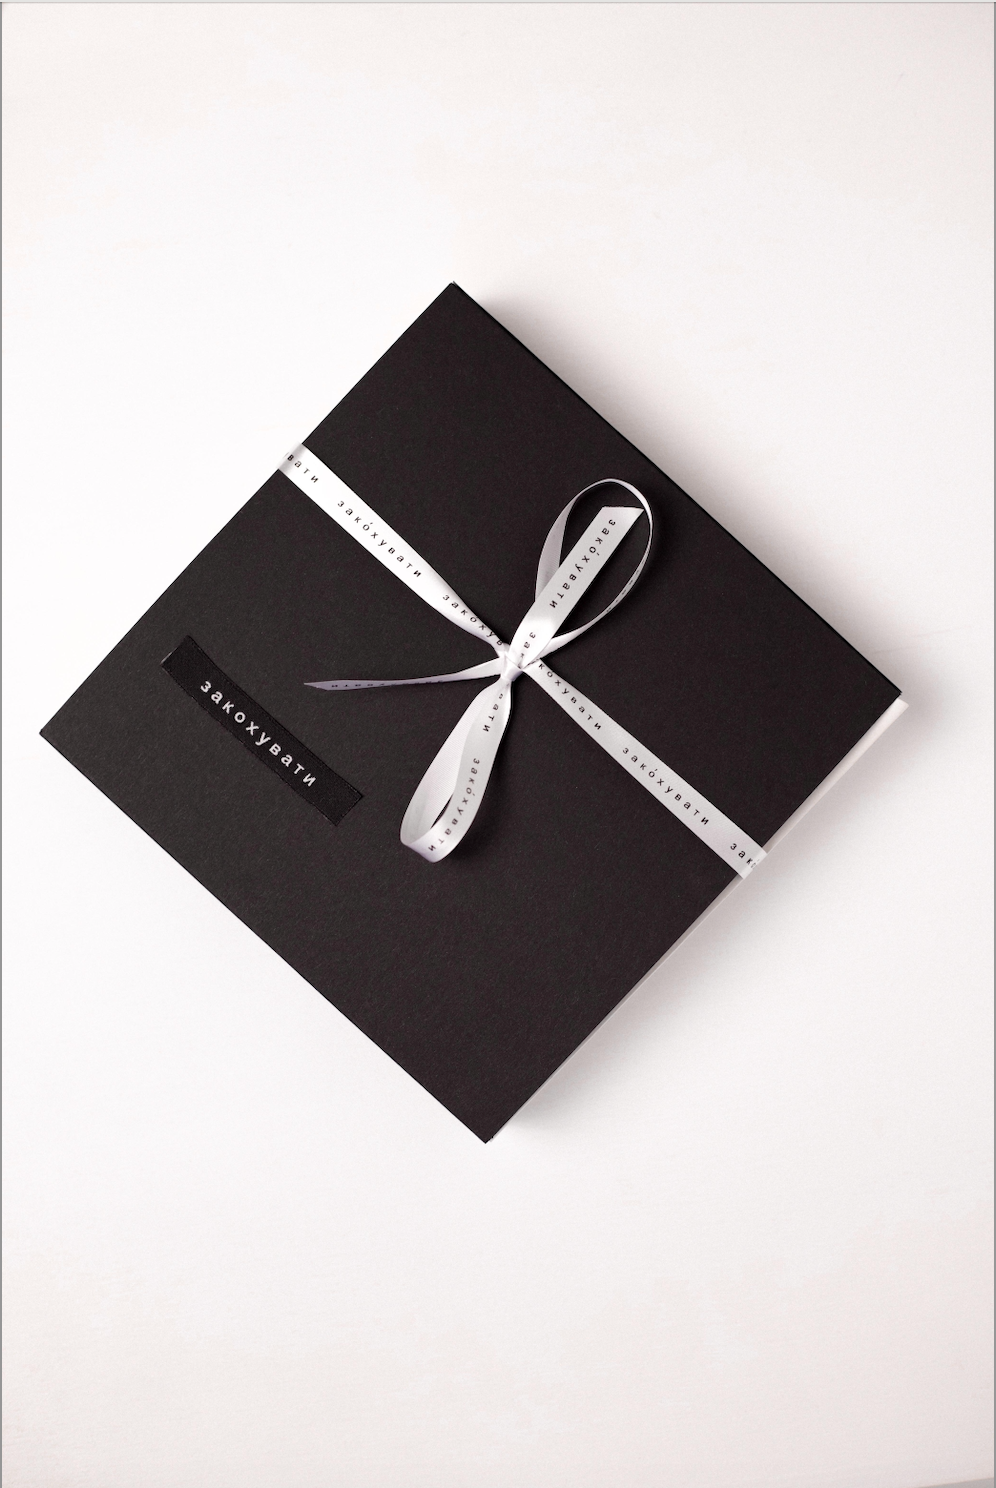 lingerie packaging and gift bags